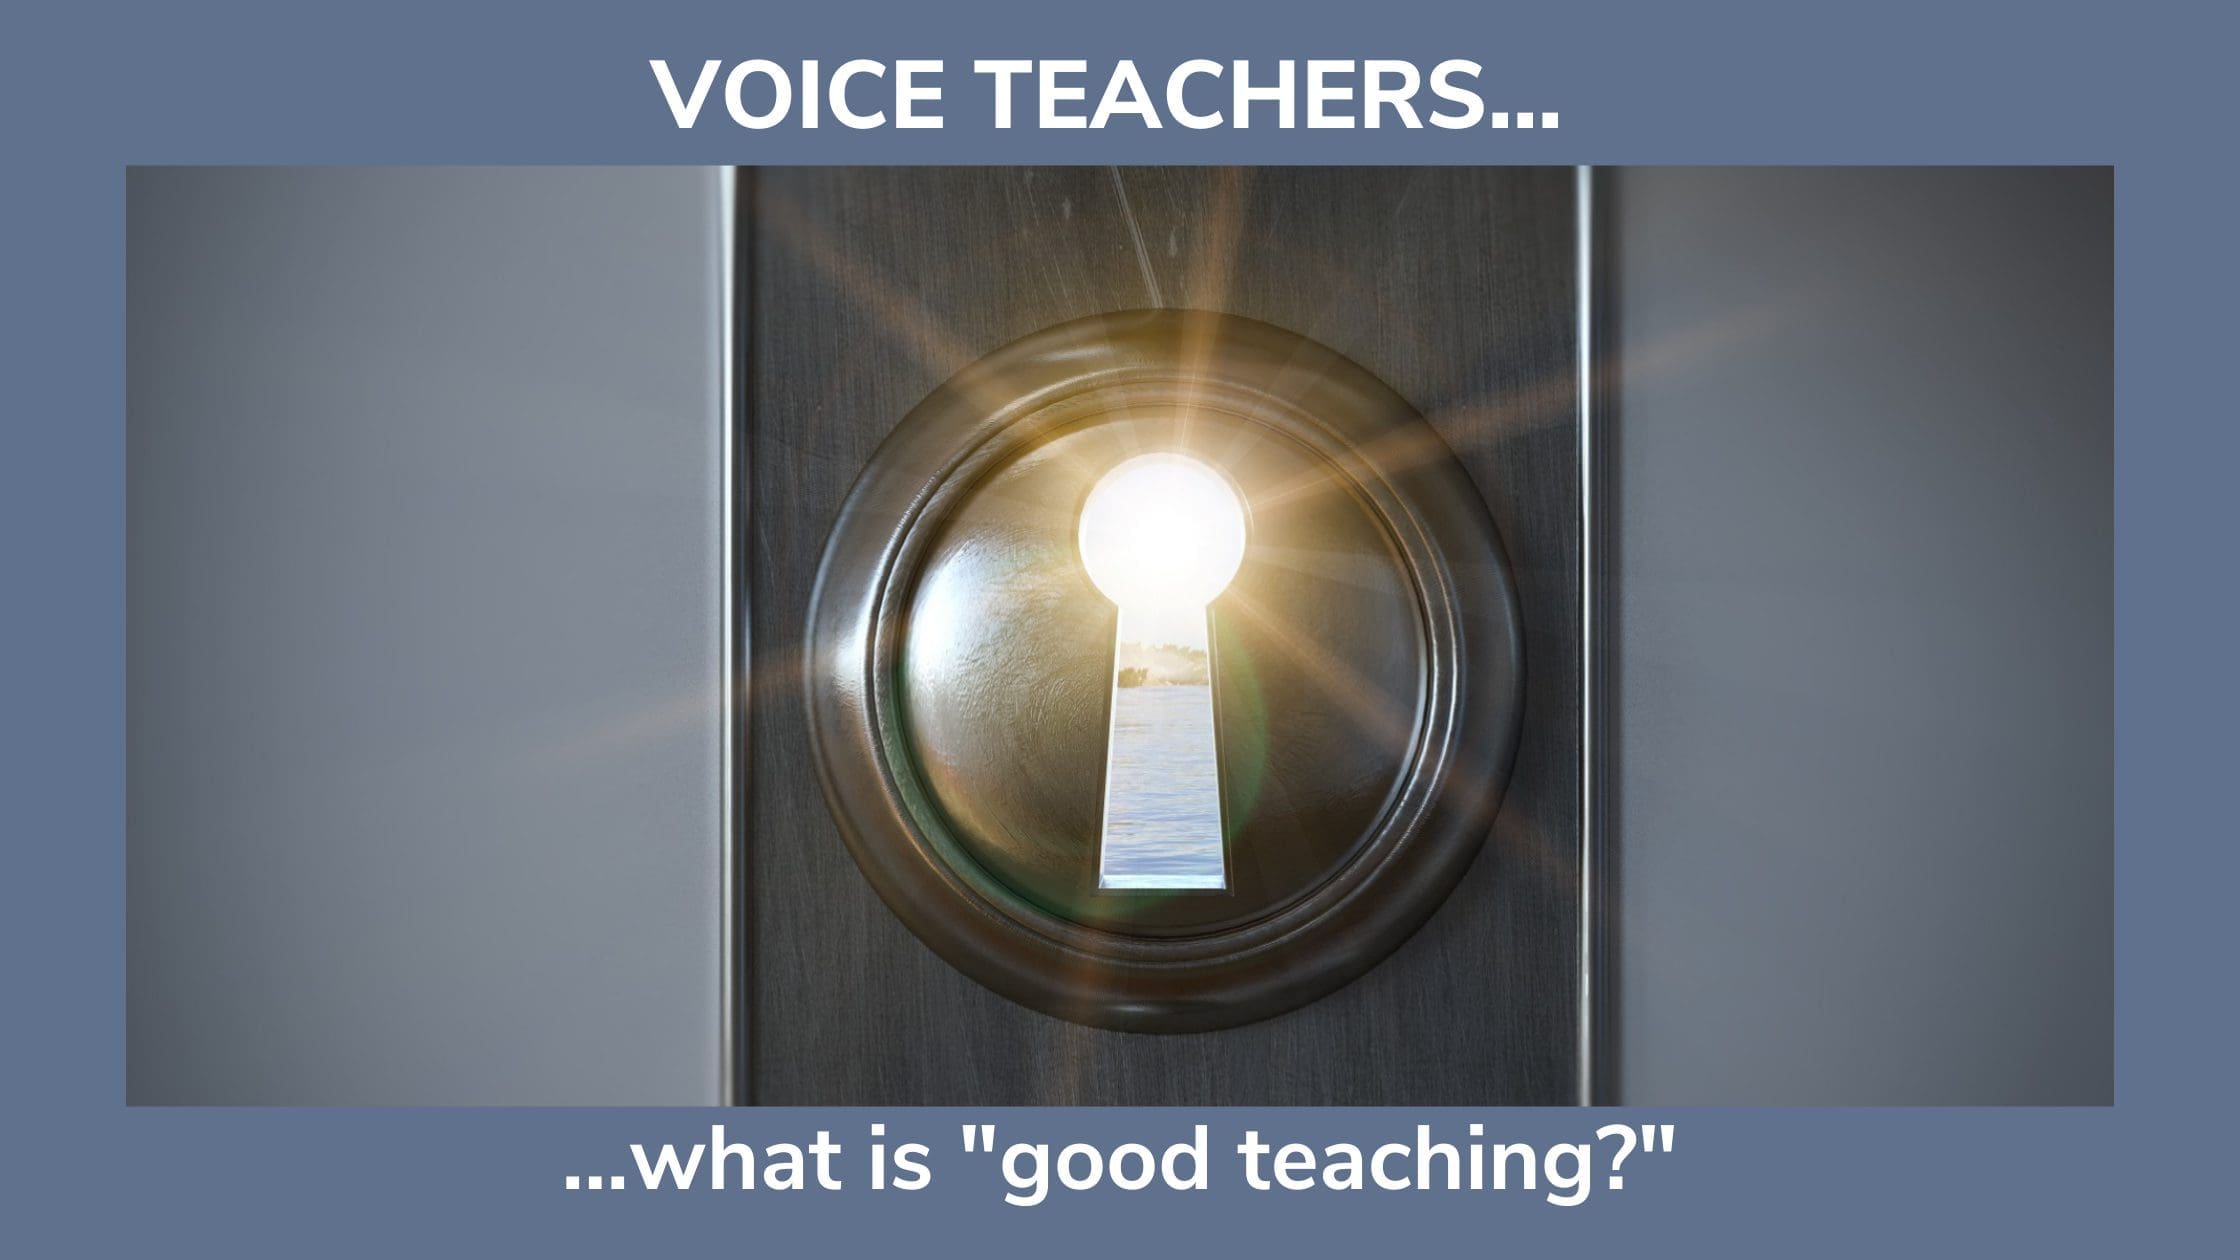 A keyhole with light shining through represents this blog title, "Voice Teachers, What is good teaching?"